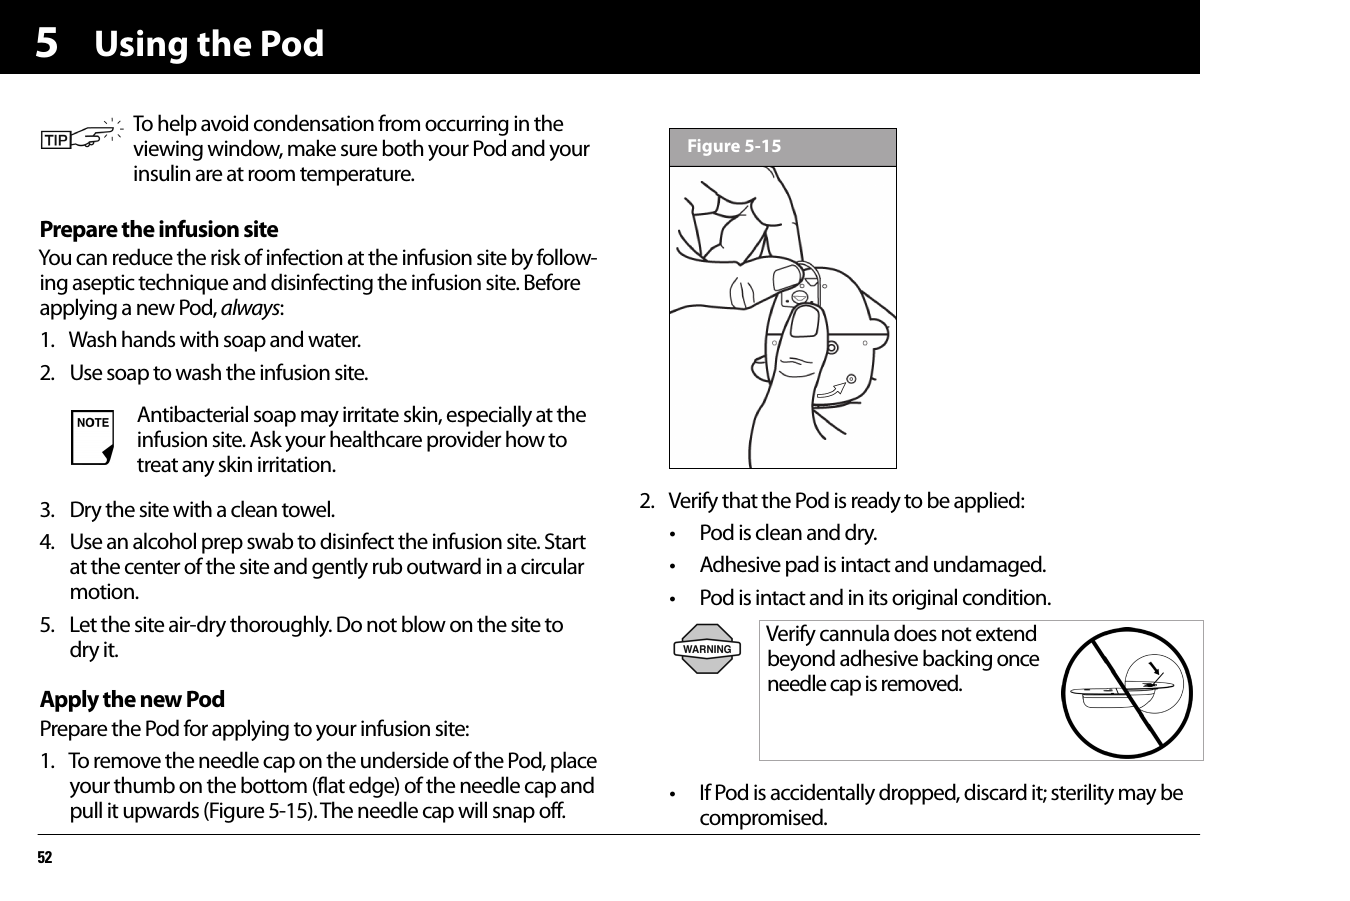 Using the Pod525Prepare the infusion siteYou can reduce the risk of infection at the infusion site by follow-ing aseptic technique and disinfecting the infusion site. Before applying a new Pod, always:1. Wash hands with soap and water.2. Use soap to wash the infusion site.3. Dry the site with a clean towel.4. Use an alcohol prep swab to disinfect the infusion site. Start at the center of the site and gently rub outward in a circular motion.5. Let the site air-dry thoroughly. Do not blow on the site to dry it.Apply the new PodPrepare the Pod for applying to your infusion site:1. To remove the needle cap on the underside of the Pod, place your thumb on the bottom (flat edge) of the needle cap and pull it upwards (Figure 5-15). The needle cap will snap off.2. Verify that the Pod is ready to be applied:• Pod is clean and dry.• Adhesive pad is intact and undamaged.• Pod is intact and in its original condition.• If Pod is accidentally dropped, discard it; sterility may be compromised.To help avoid condensation from occurring in the viewing window, make sure both your Pod and your insulin are at room temperature.Antibacterial soap may irritate skin, especially at the infusion site. Ask your healthcare provider how to treat any skin irritation.Verify cannula does not extend beyond adhesive backing once needle cap is removed. Figure 5-15